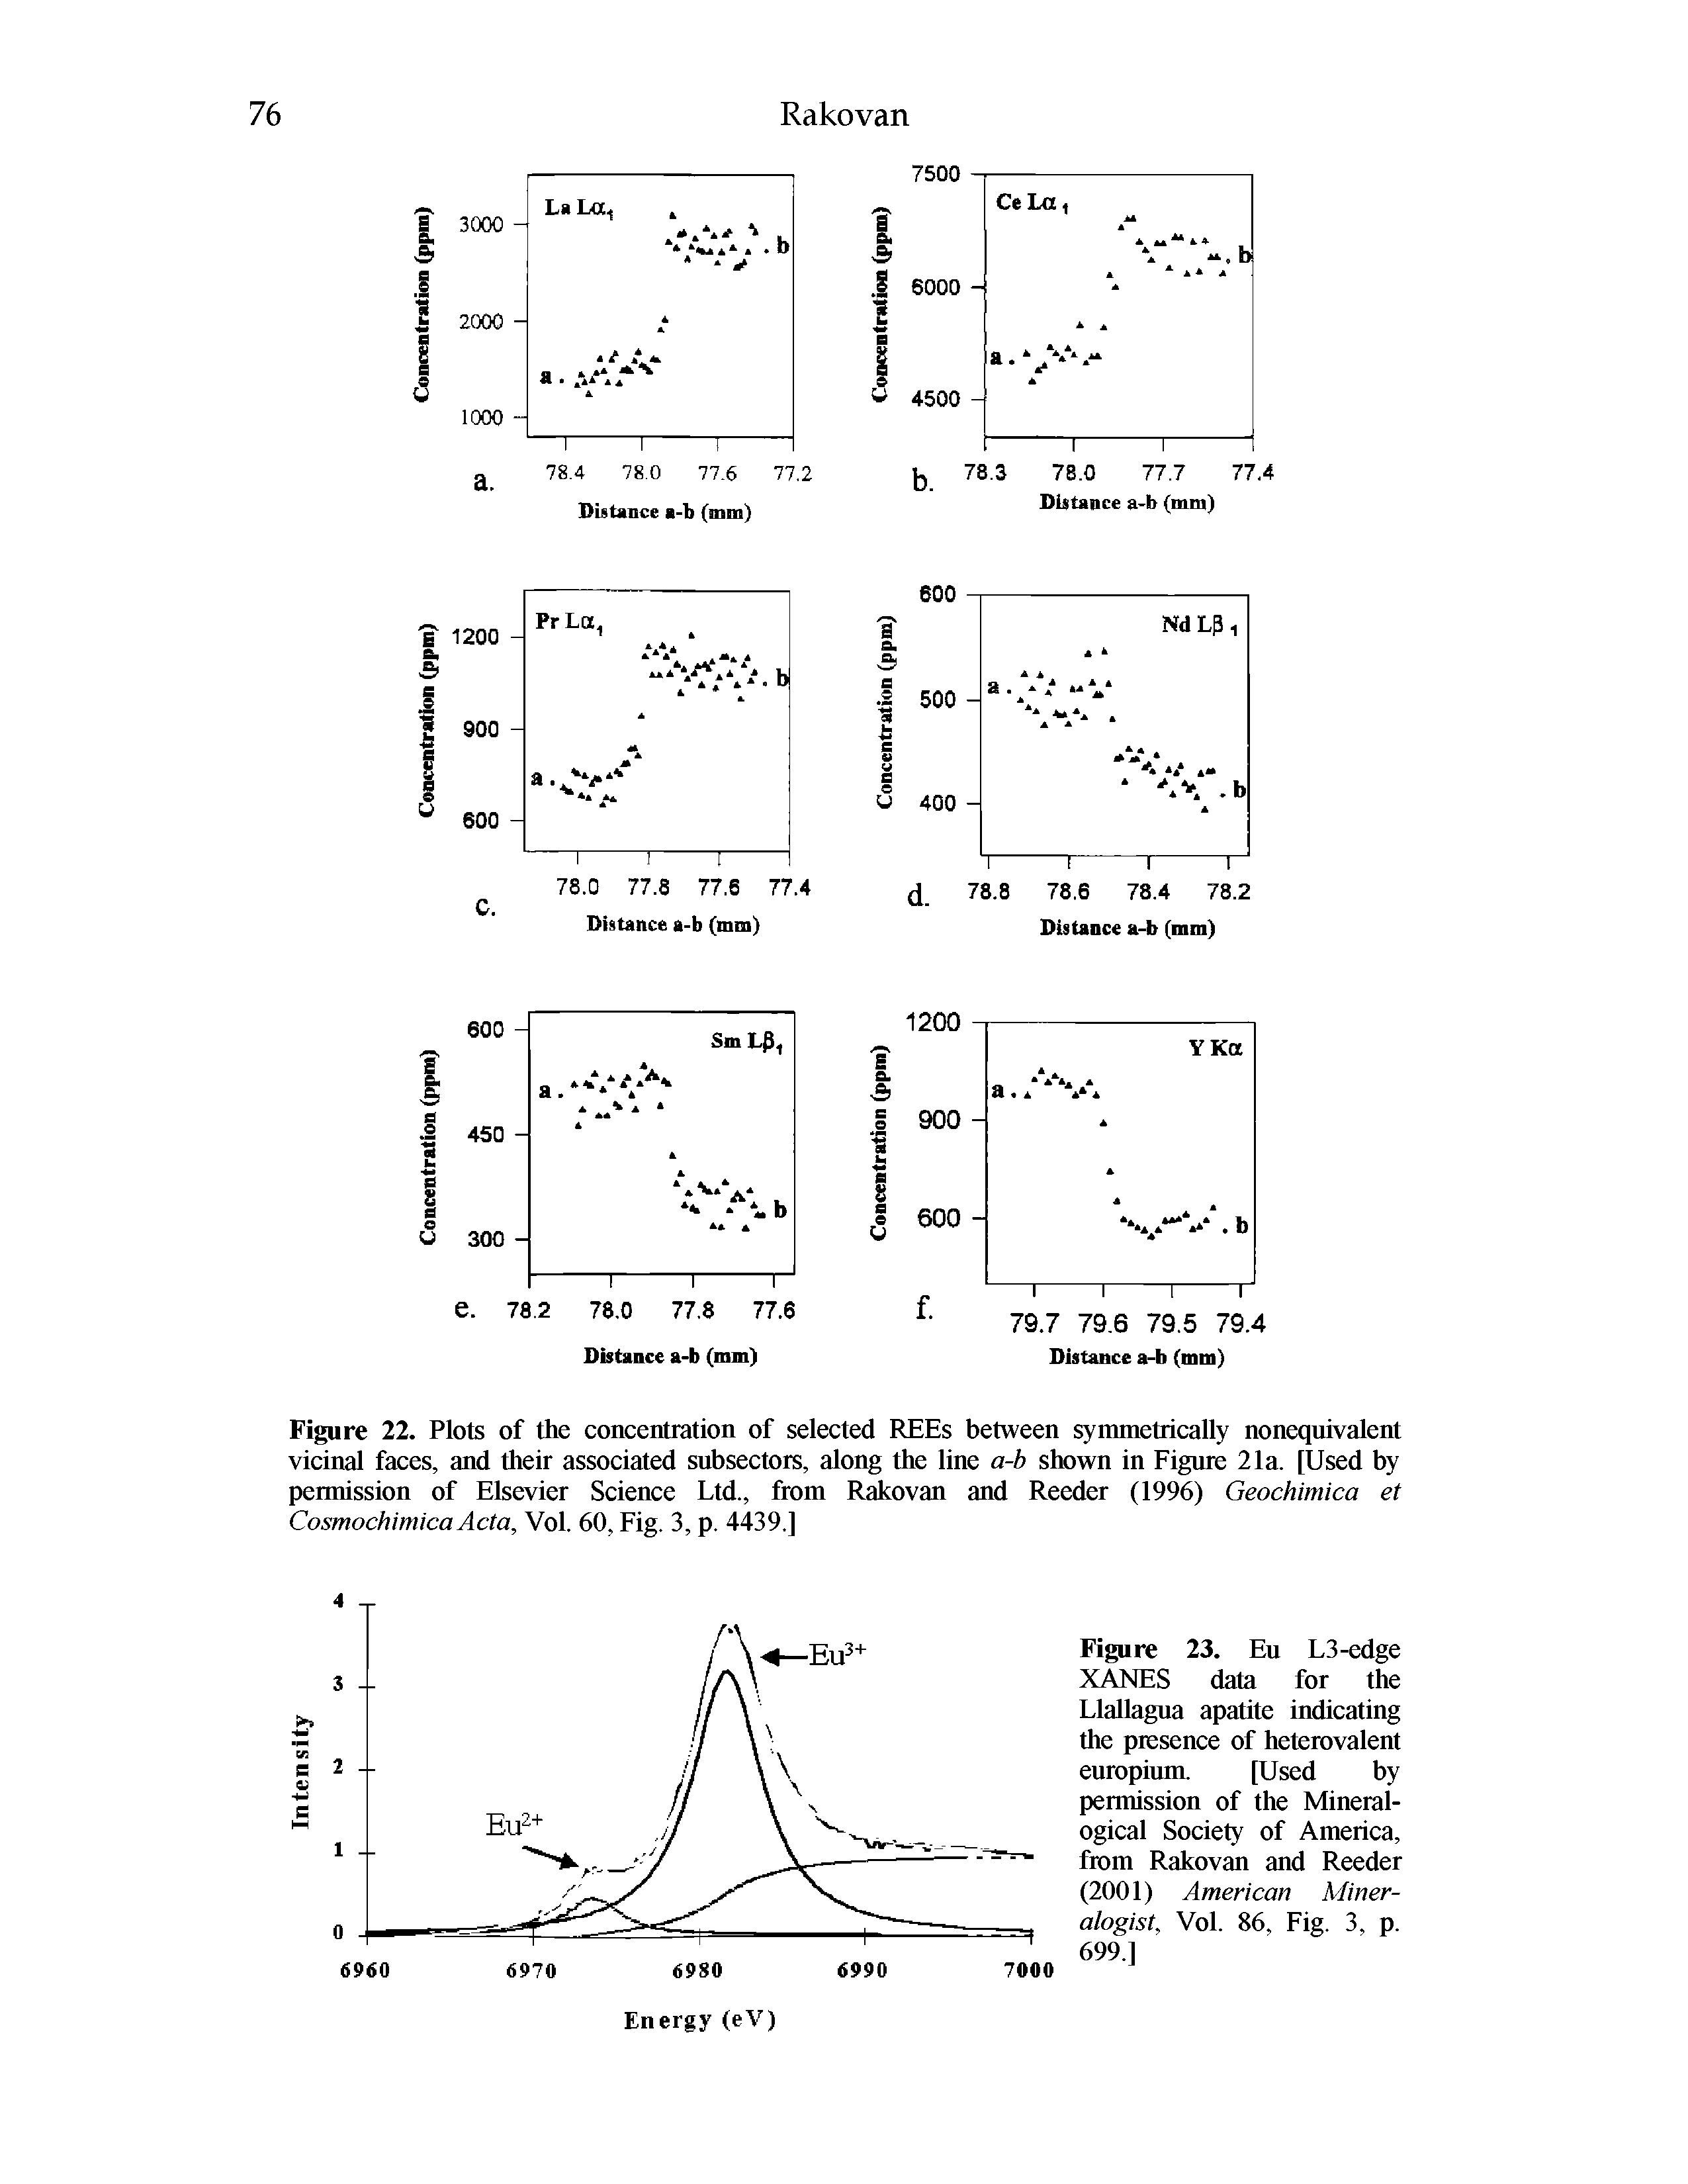 Figure 22. Plots of the concentration of selected REEs between symmetrically noneqnivalent vicinal faces, and their associated snbsectors, along the line a-b shown in Fignre 21a. [Used by permission of Elsevier Science Ltd., from Rakovan and Reeder (1996) Geochimica et Cosmochimica Acta, Vol. 60, Fig. 3, p. 4439.]...